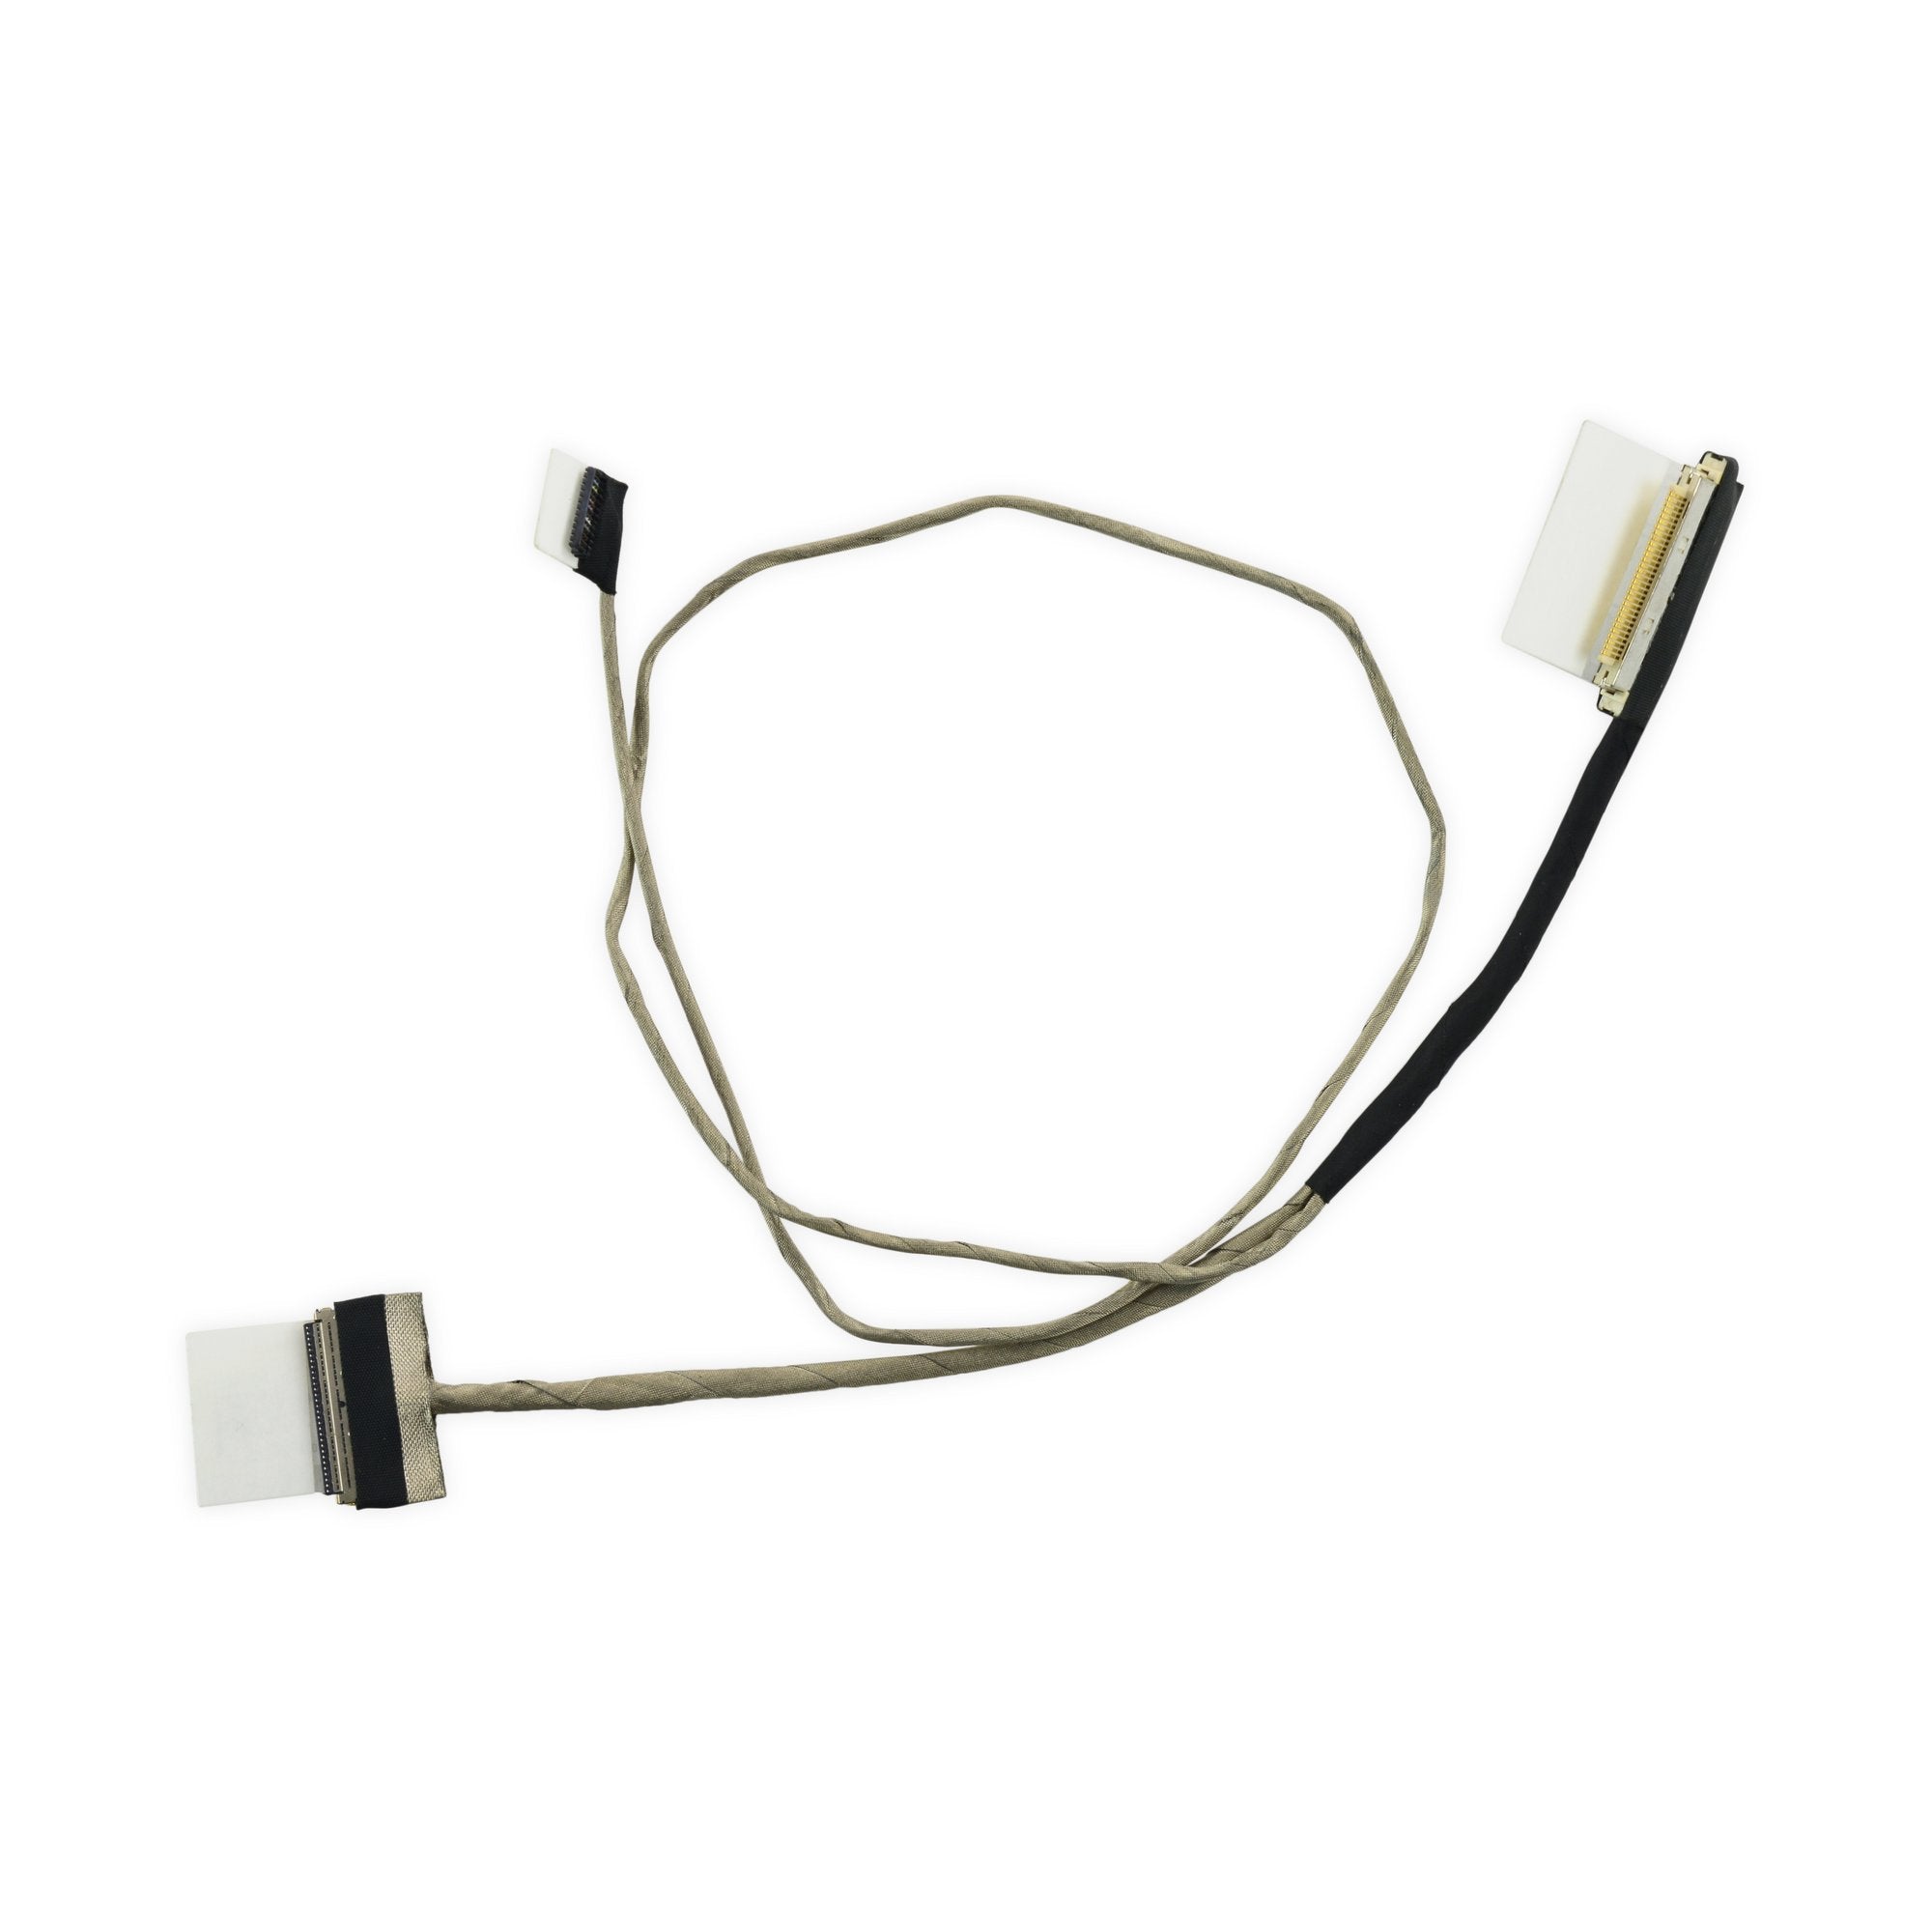 ASUS Chromebook C300MA Display Data Cable